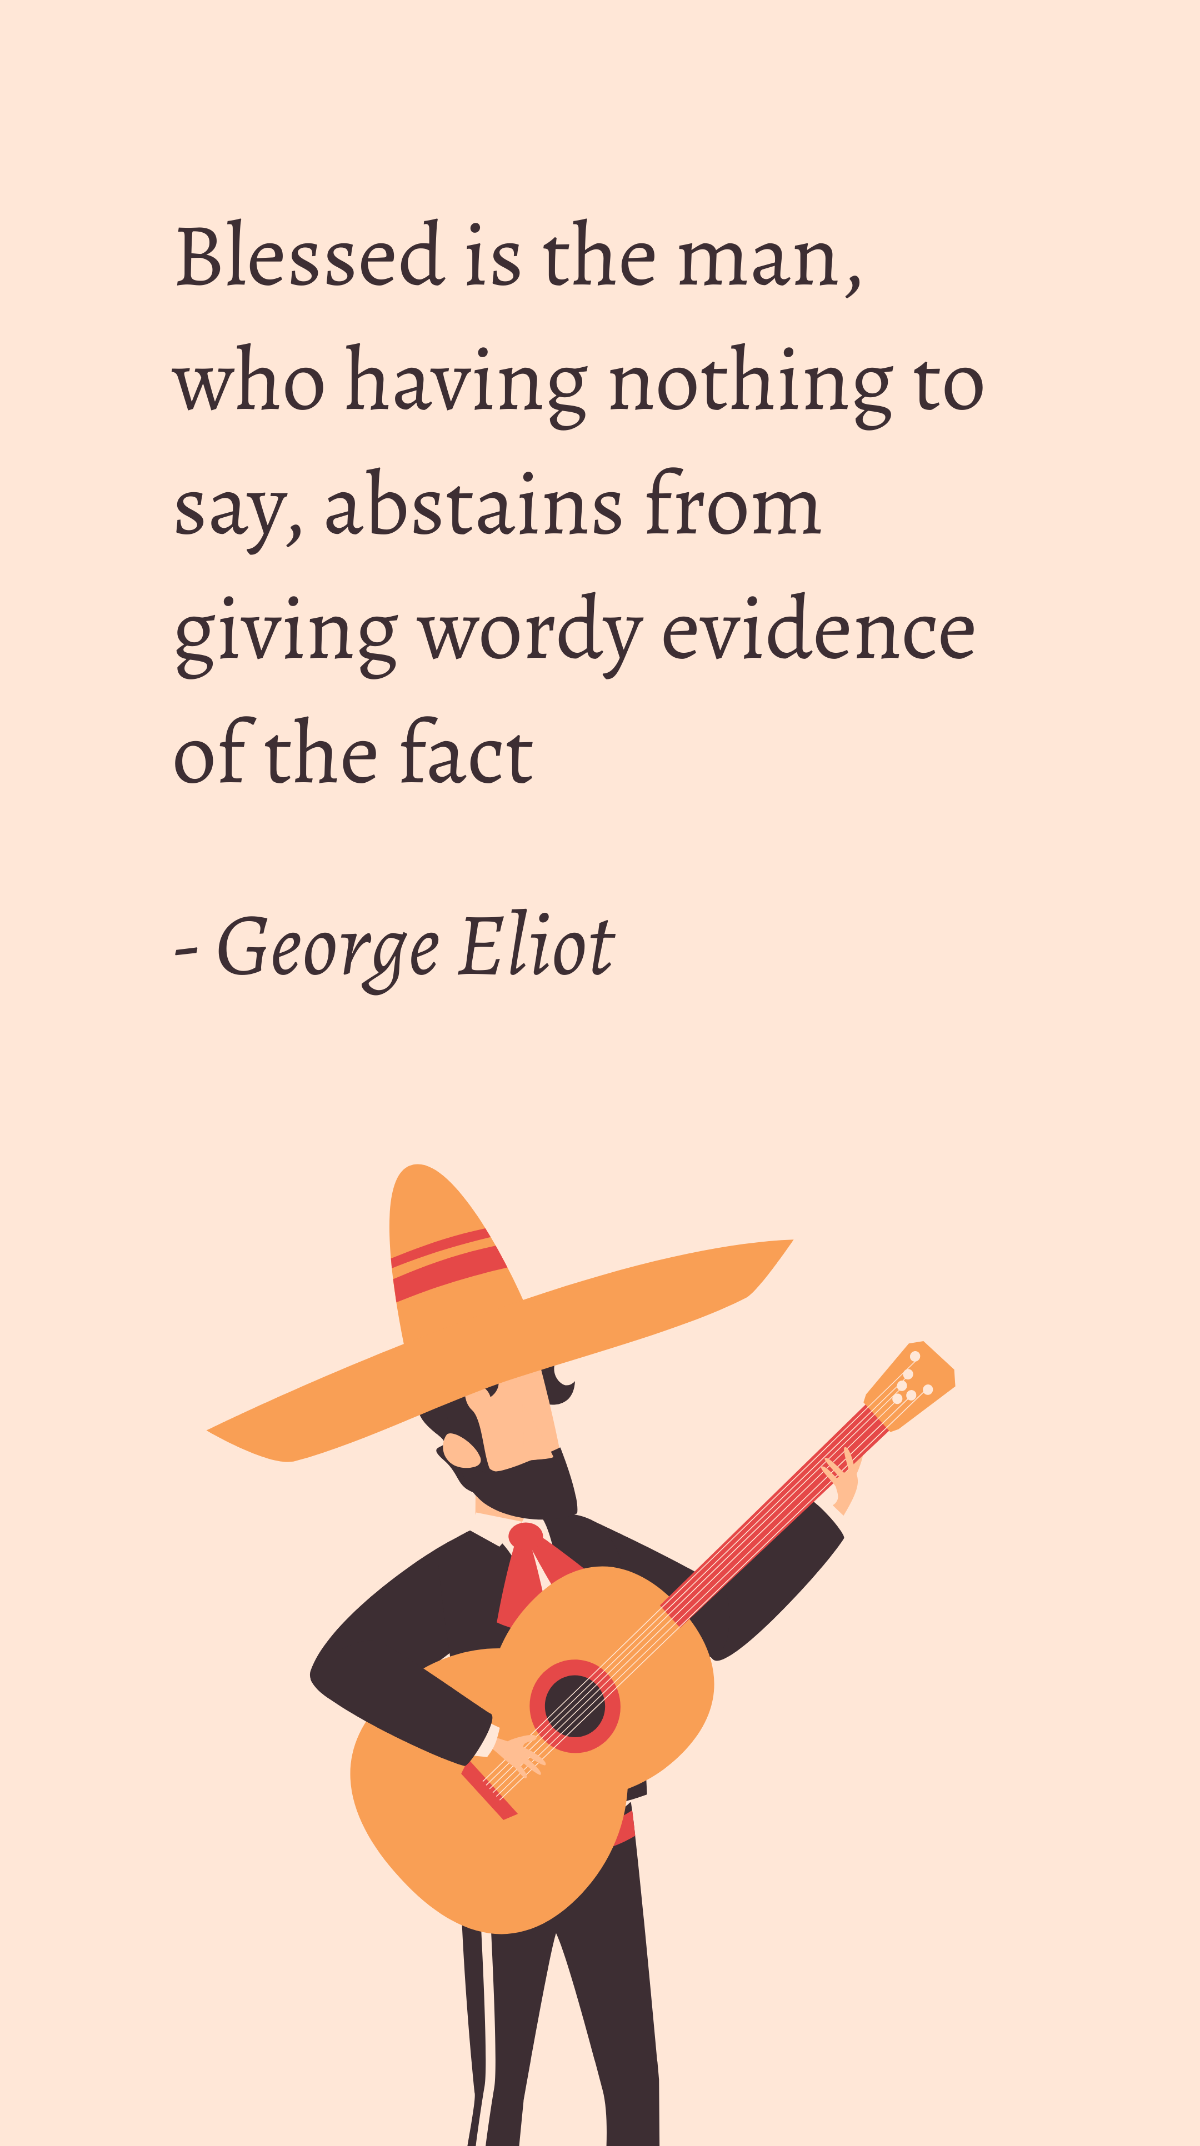 George Eliot - Blessed is the man, who having nothing to say, abstains from giving wordy evidence of the fact